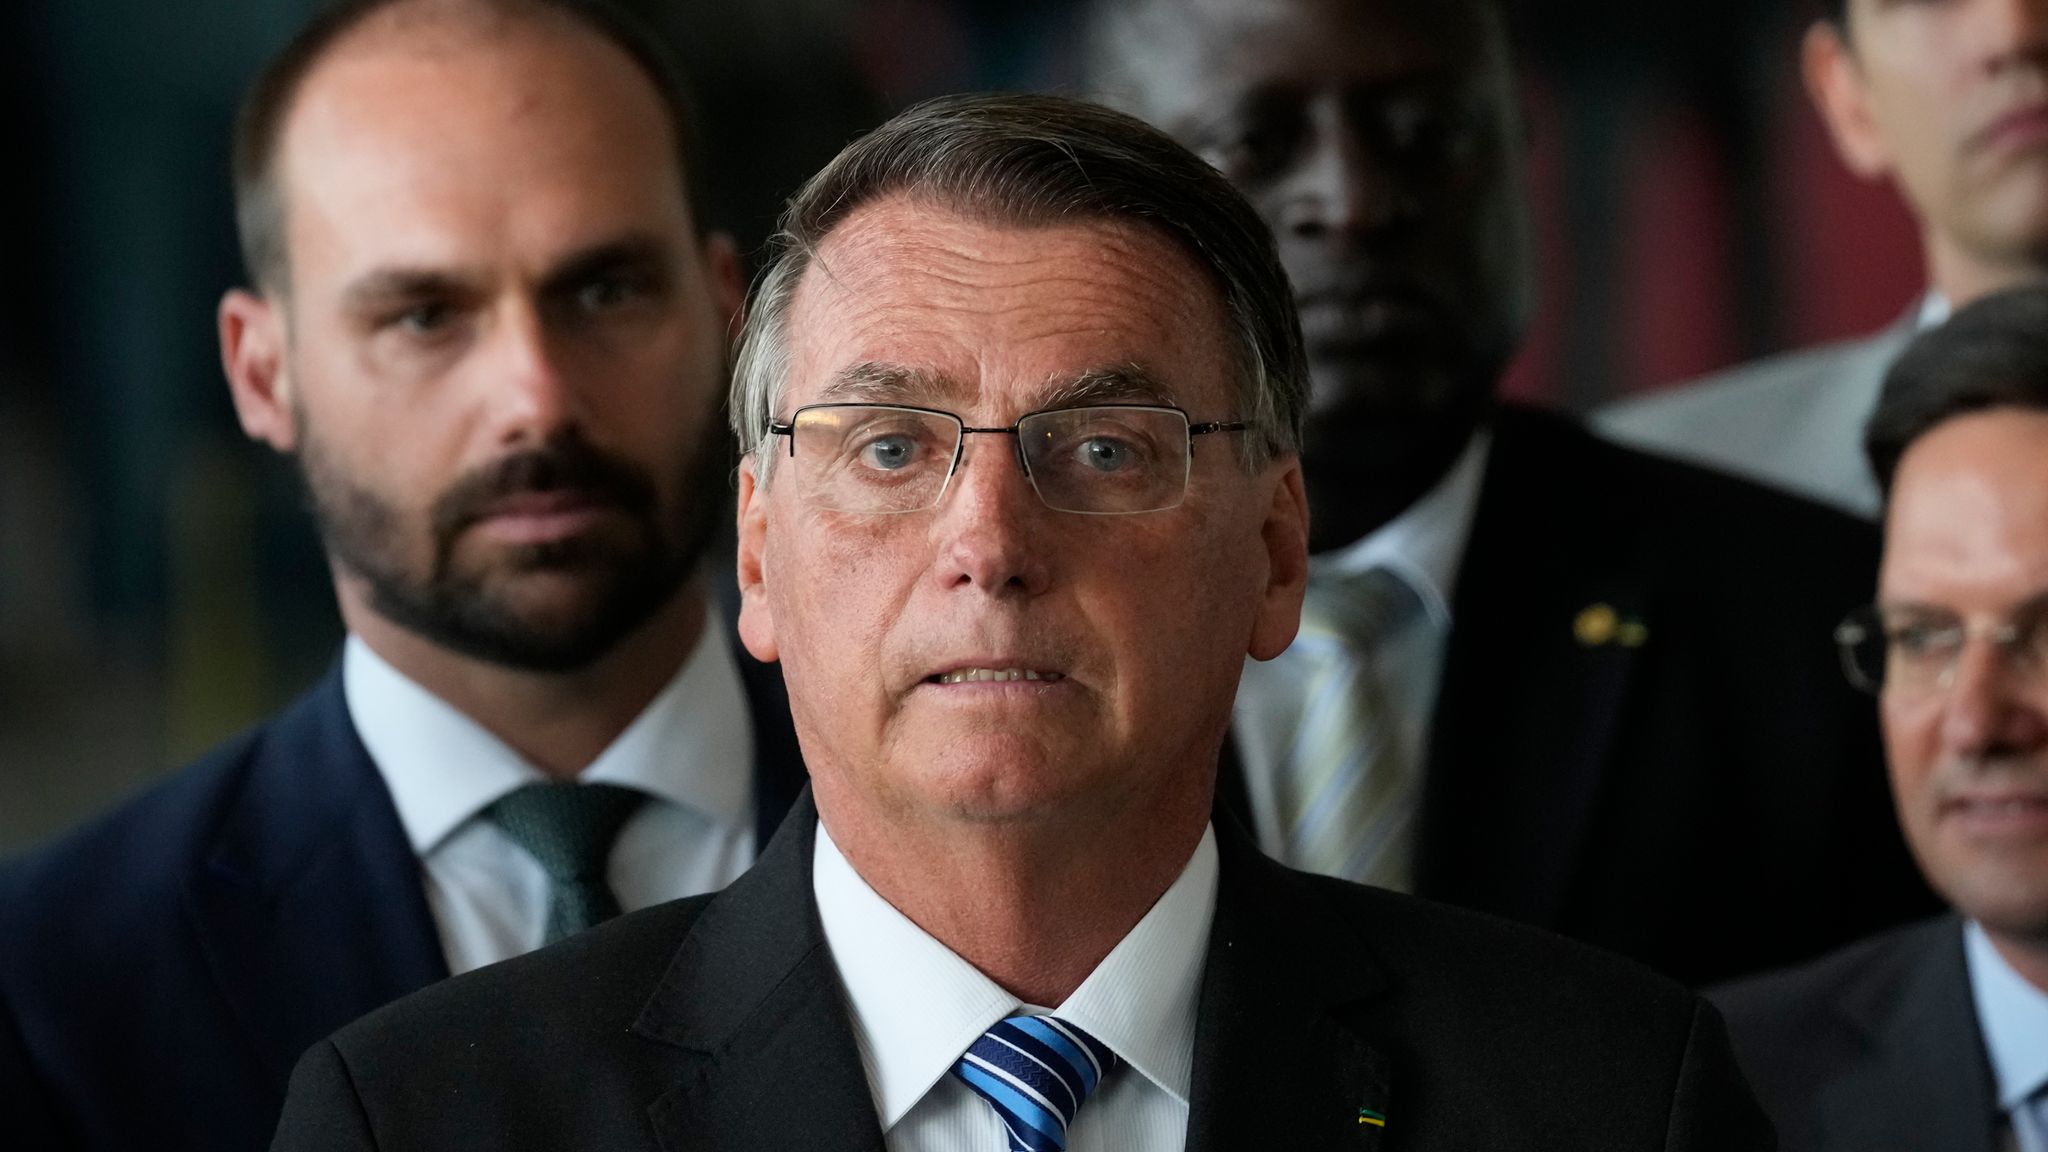 Bolsonaro's outsider aura dims after Brazil's four tough years